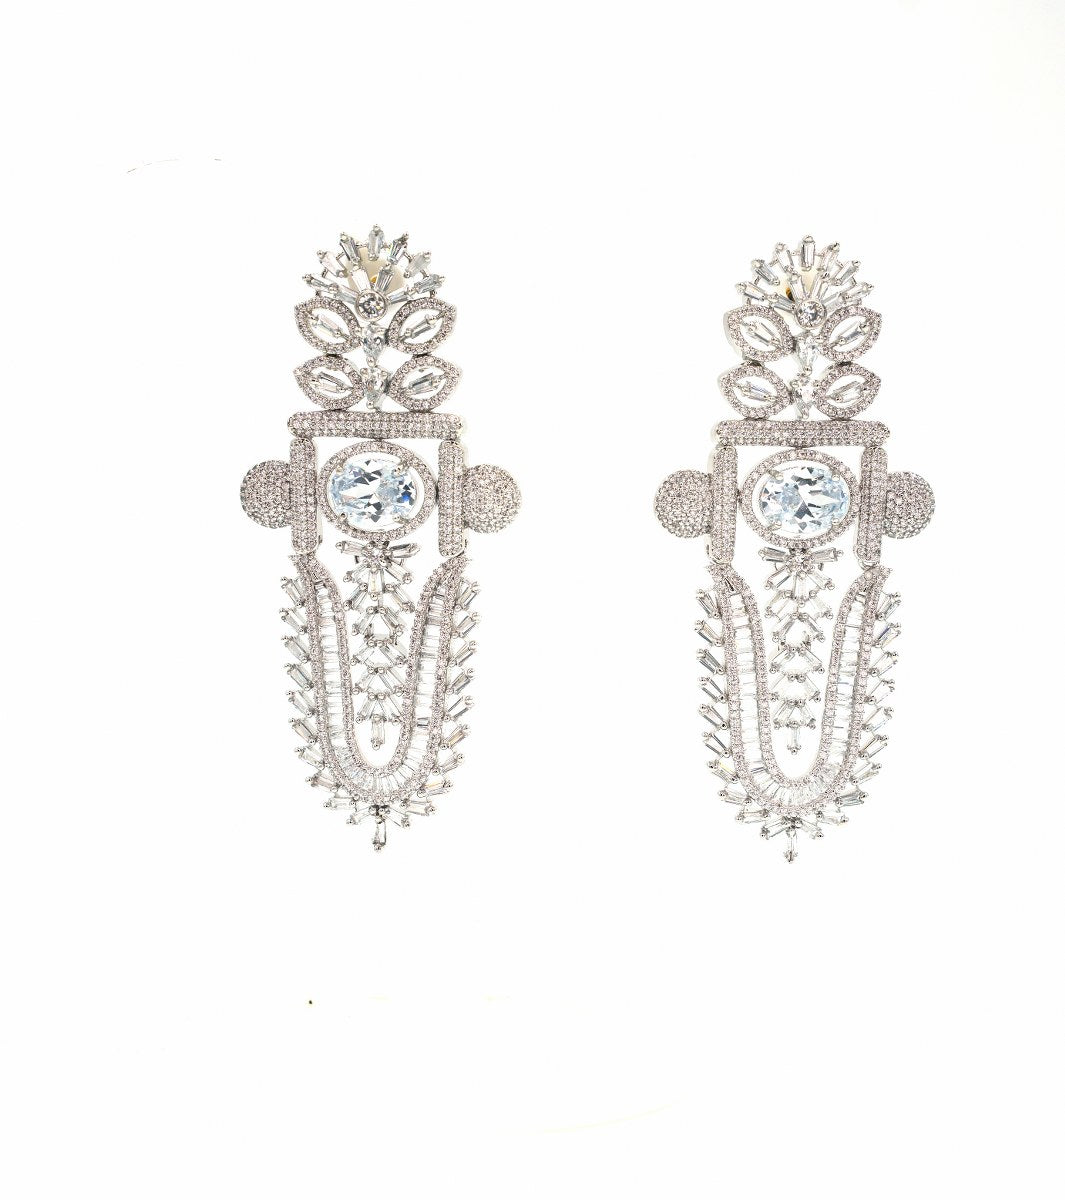 AD EARRINGS WITH SILVER COLOUR RHODIUM PLATING